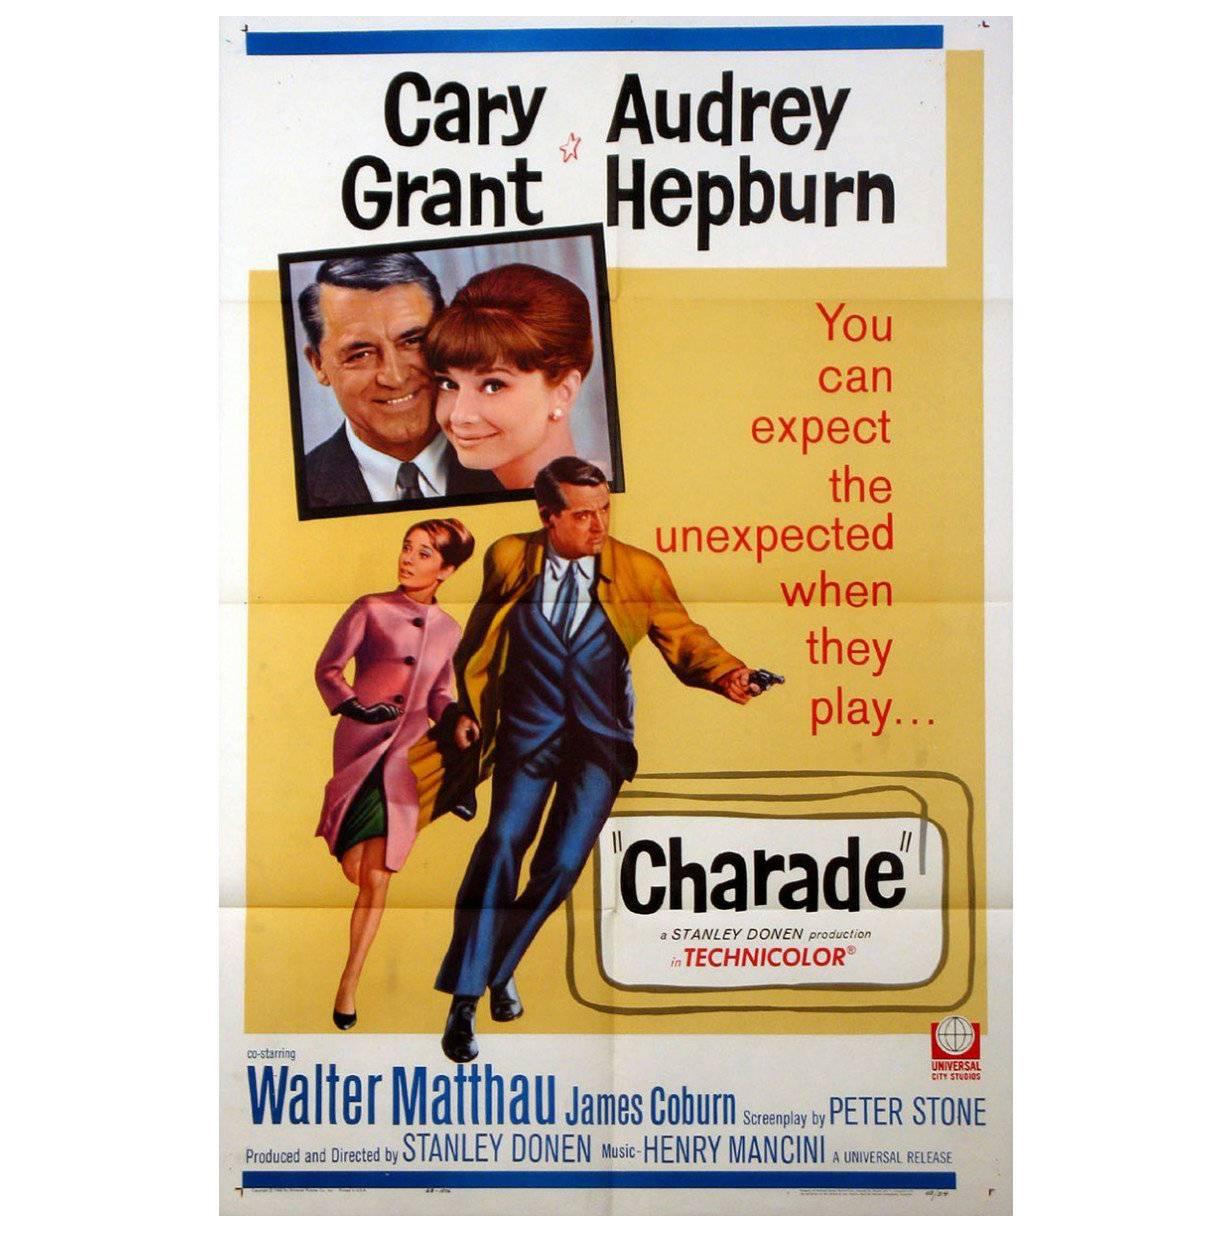 "Charade" Film Poster, 1963 For Sale